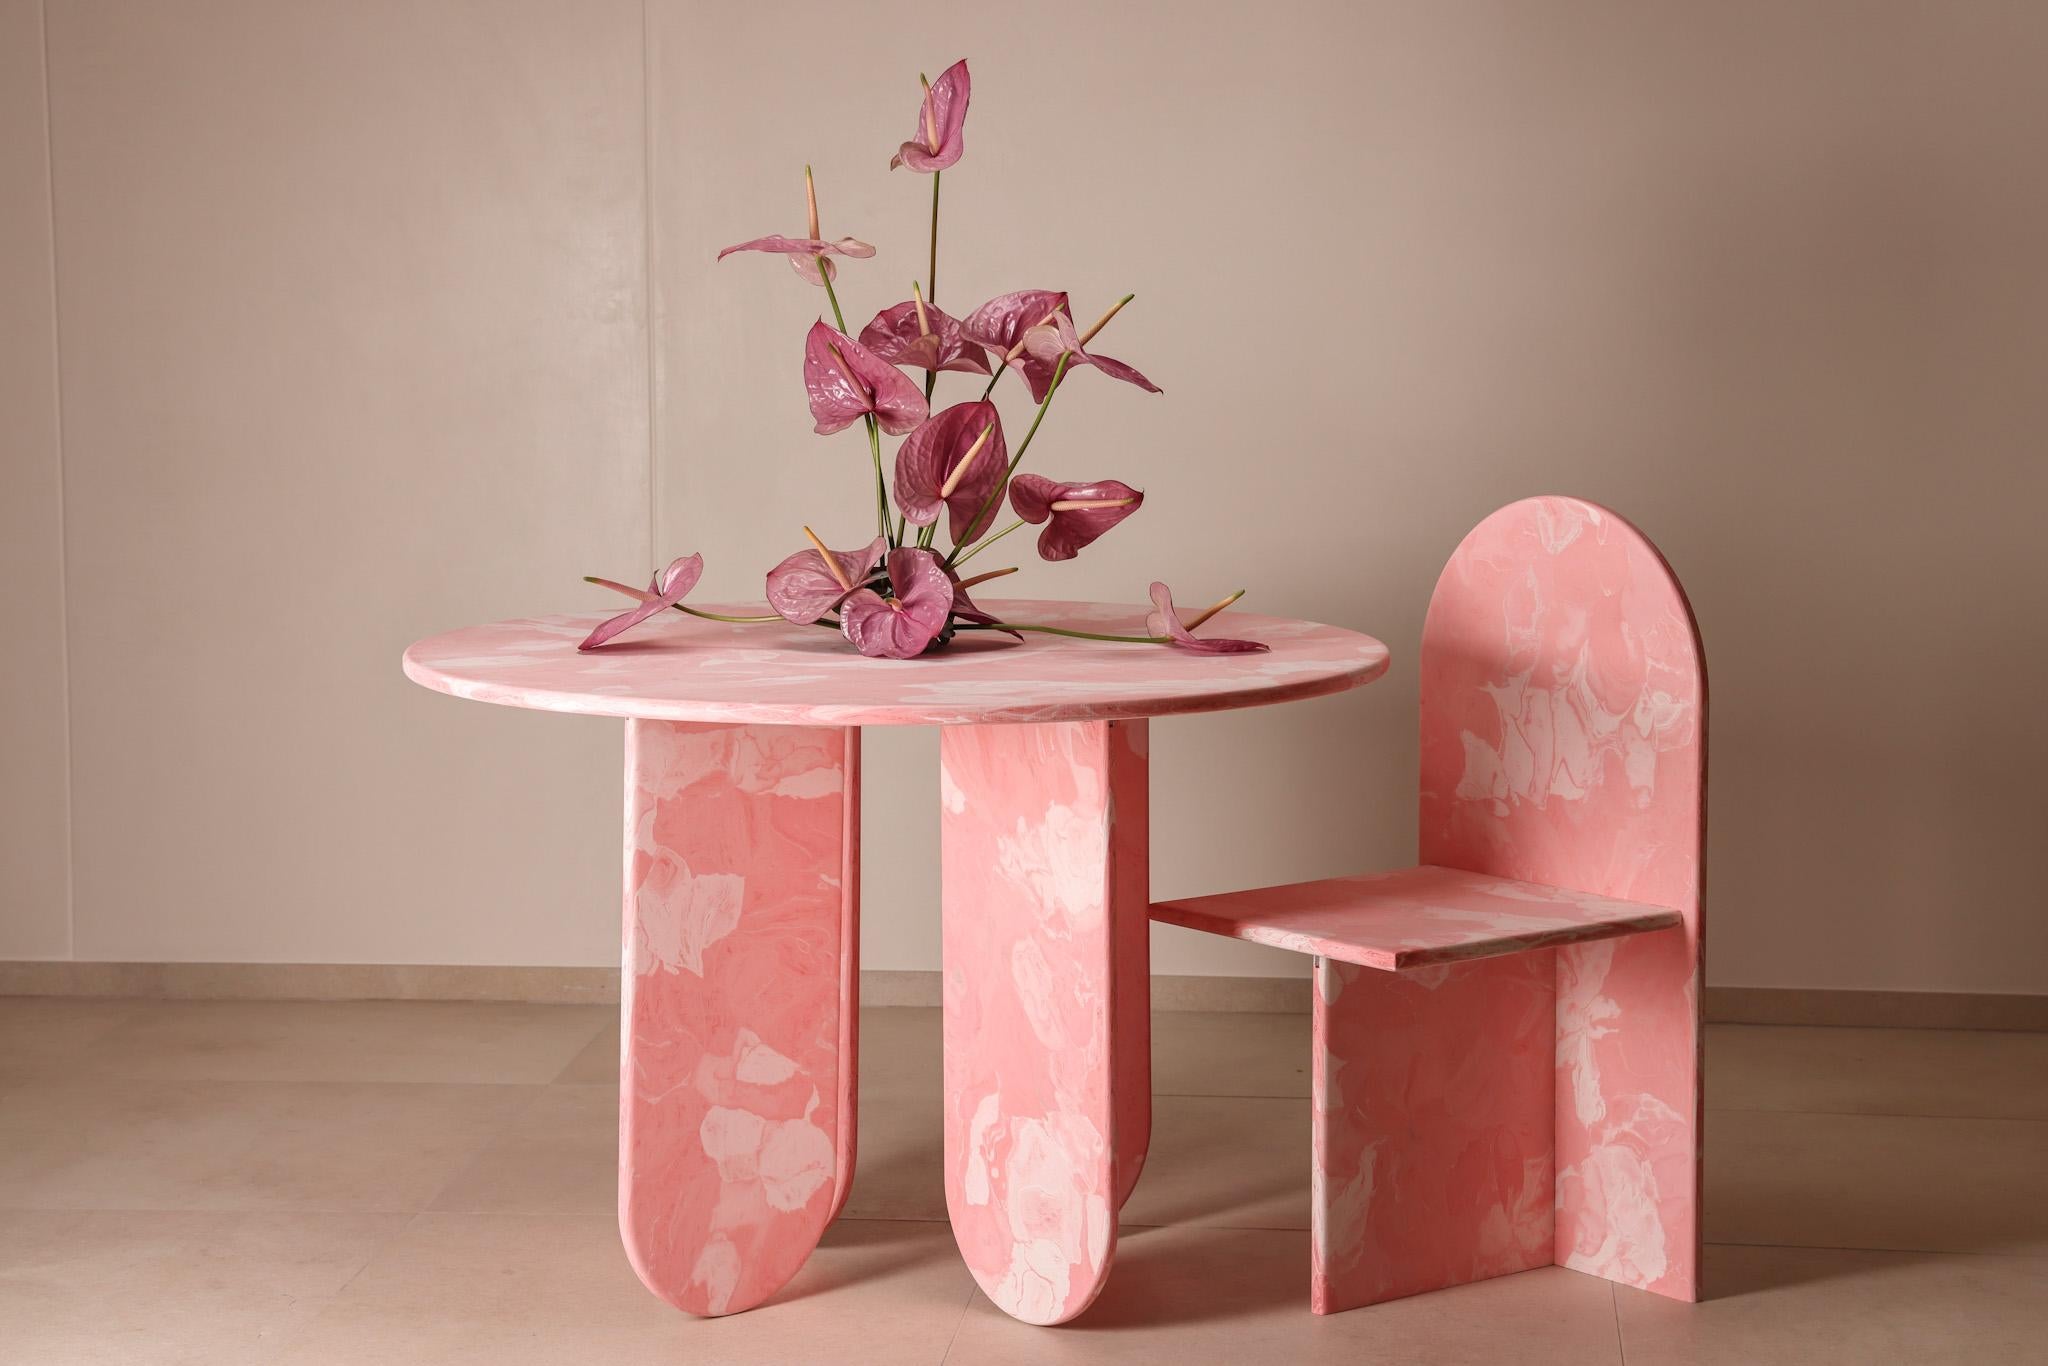 4x Contemporary Chairs Pink 100% Recycled Plastic Hand-Crafted by Anqa Studios For Sale 2